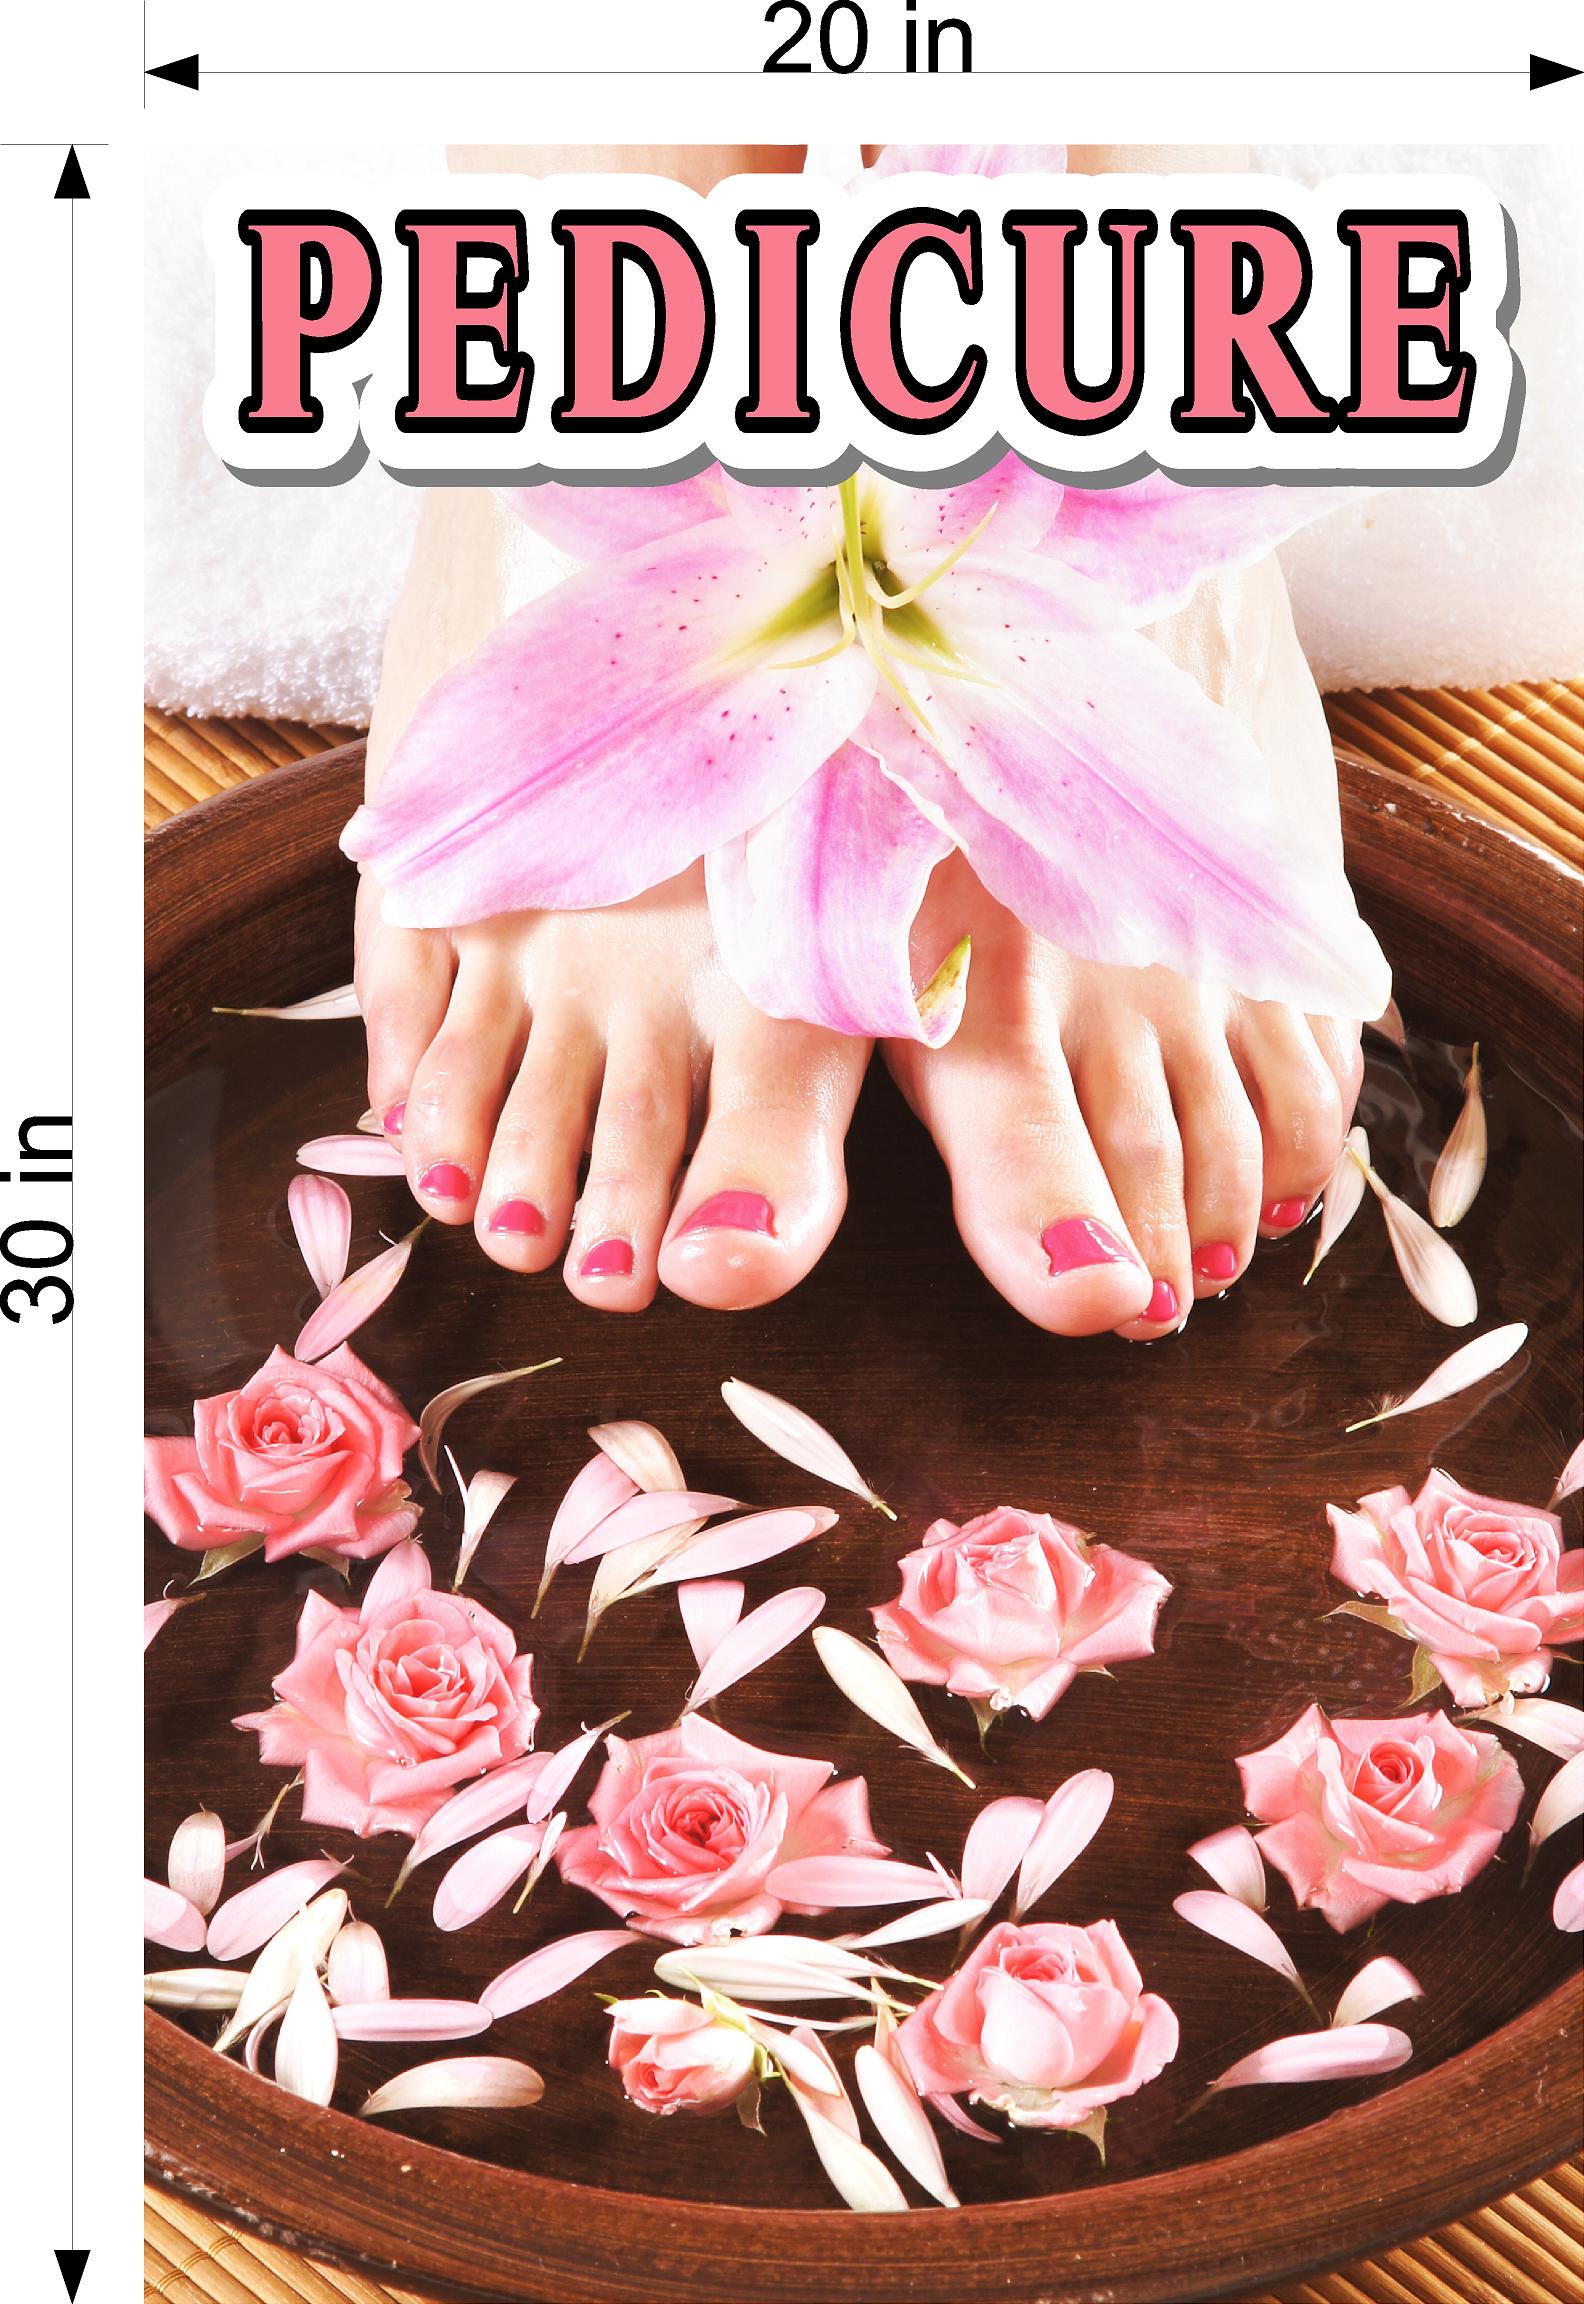 Pedicure 11 Wallpaper Poster Decal with Adhesive Backing Wall Sticker Decor Indoors Interior Sign Vertical